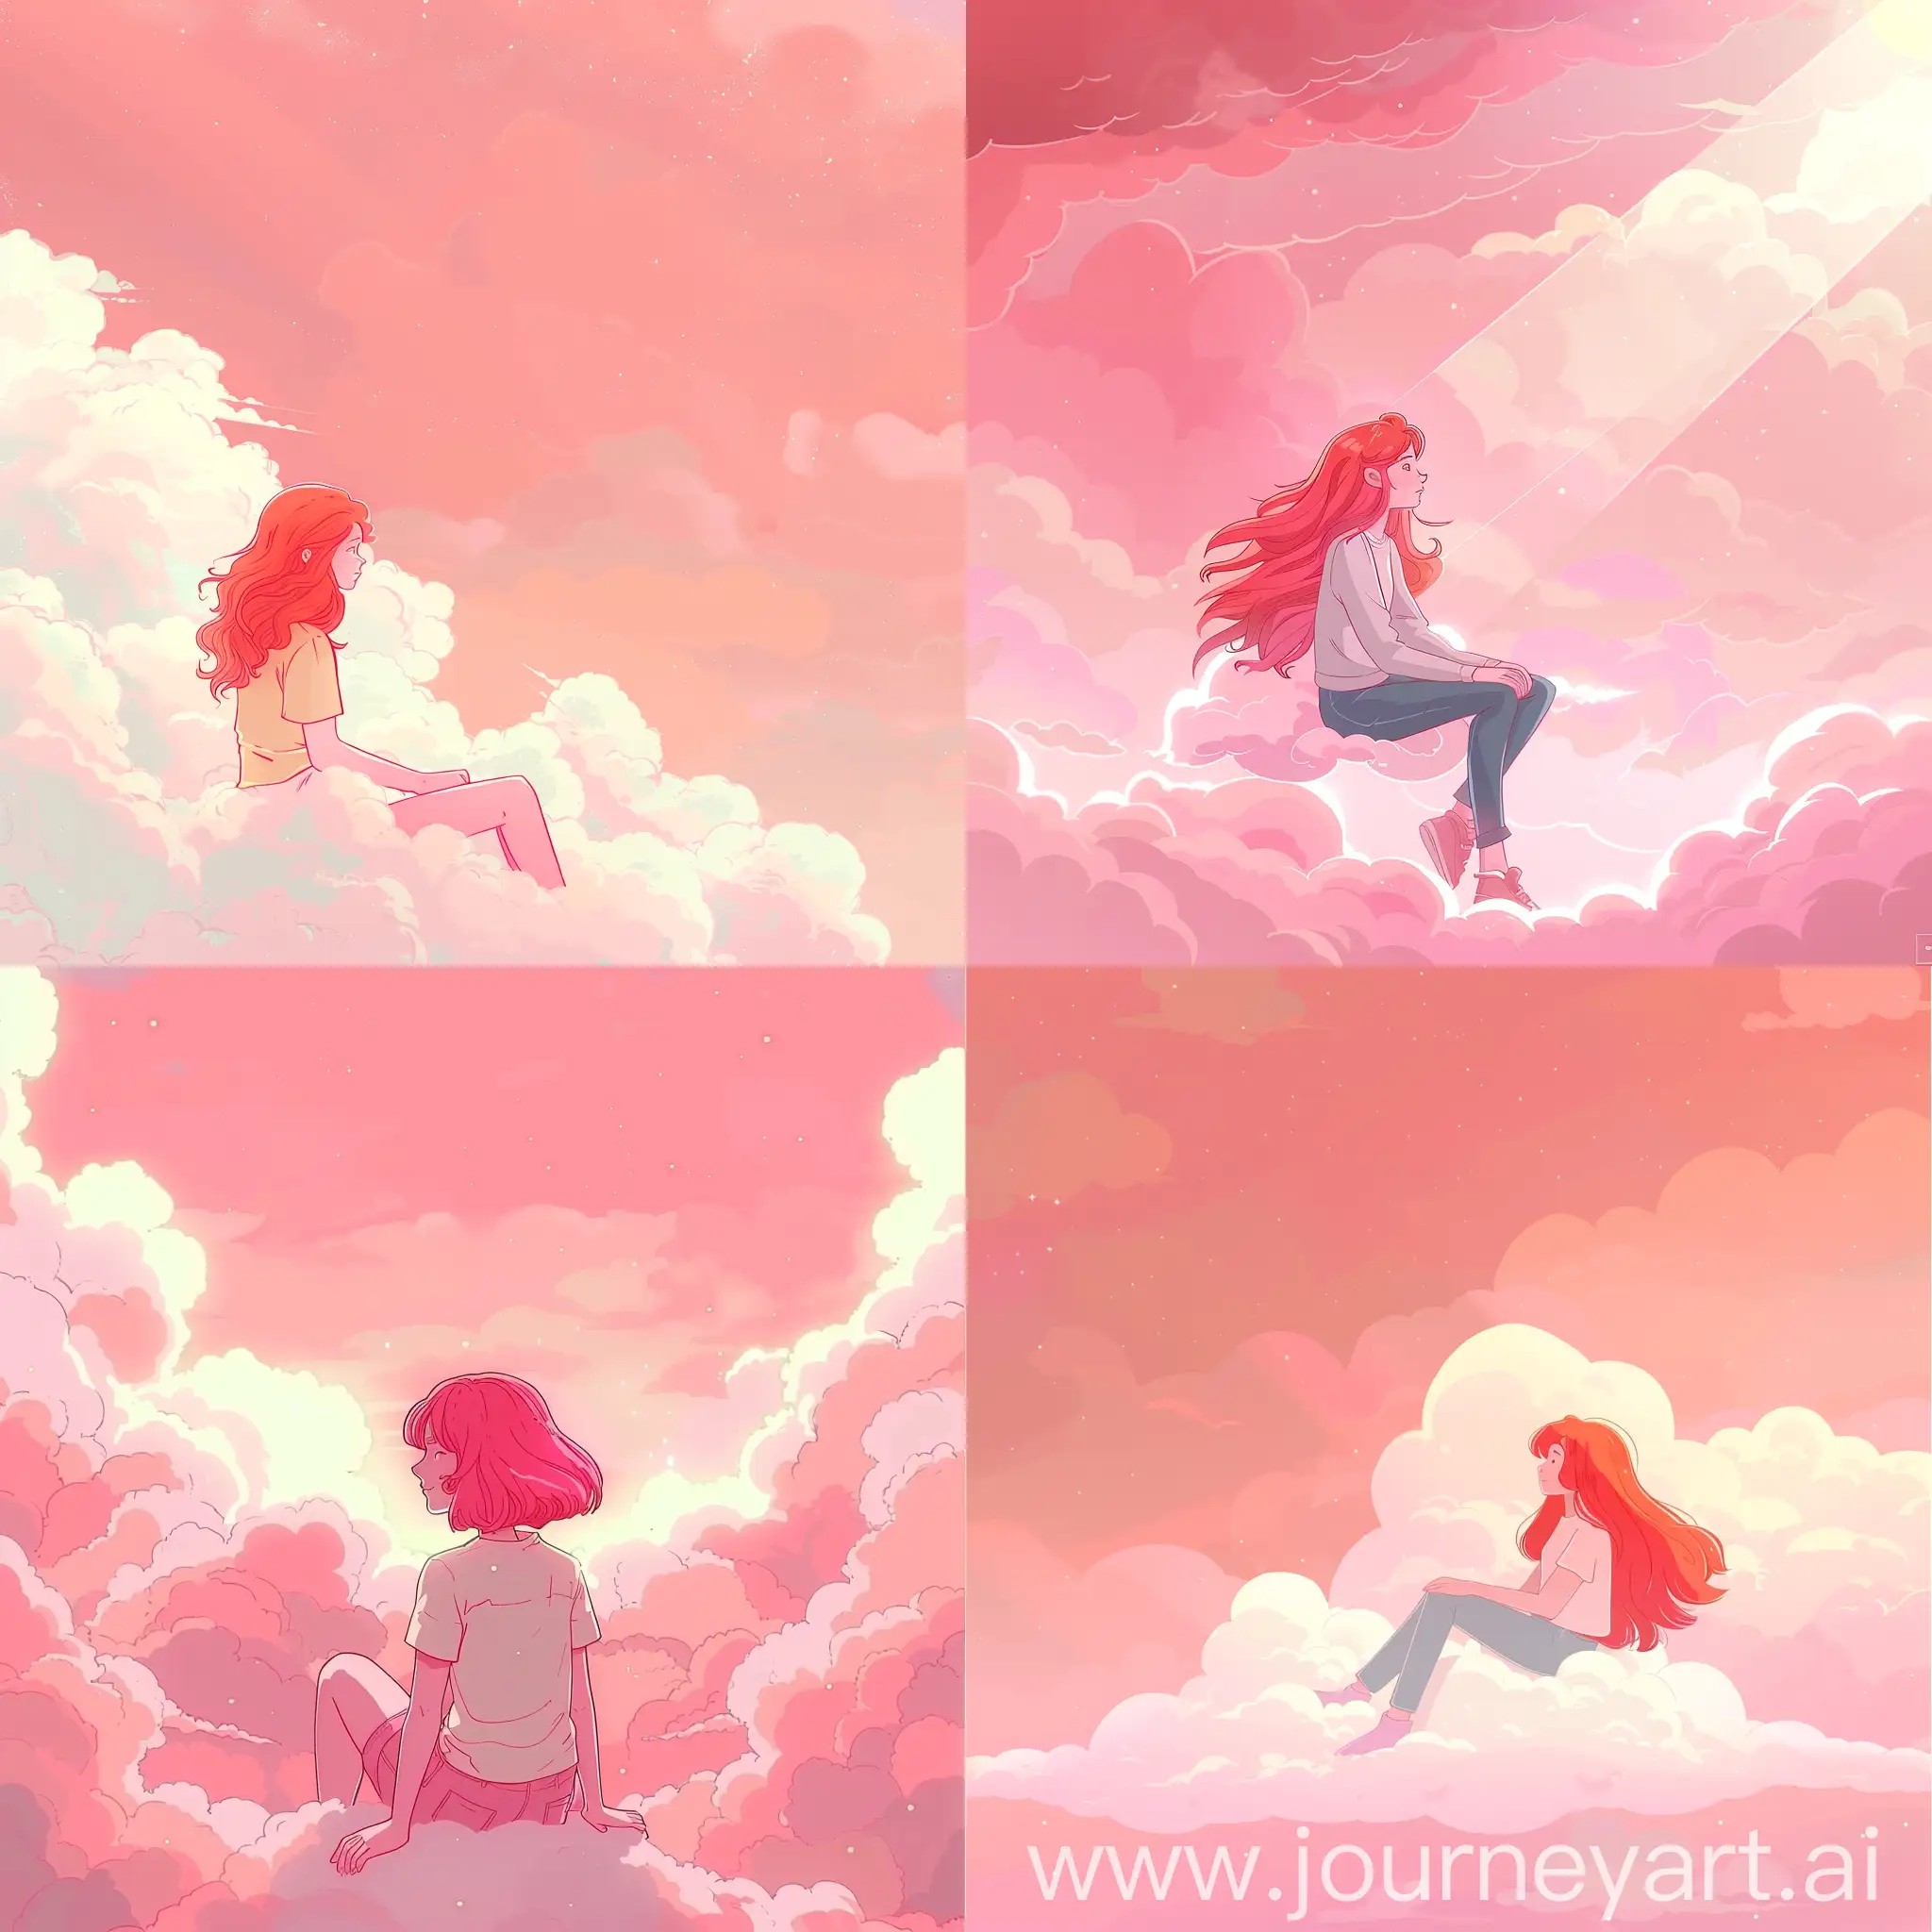 RedHaired-Girl-Sitting-on-a-Pink-Glowing-Cloud-in-Cartoon-Style